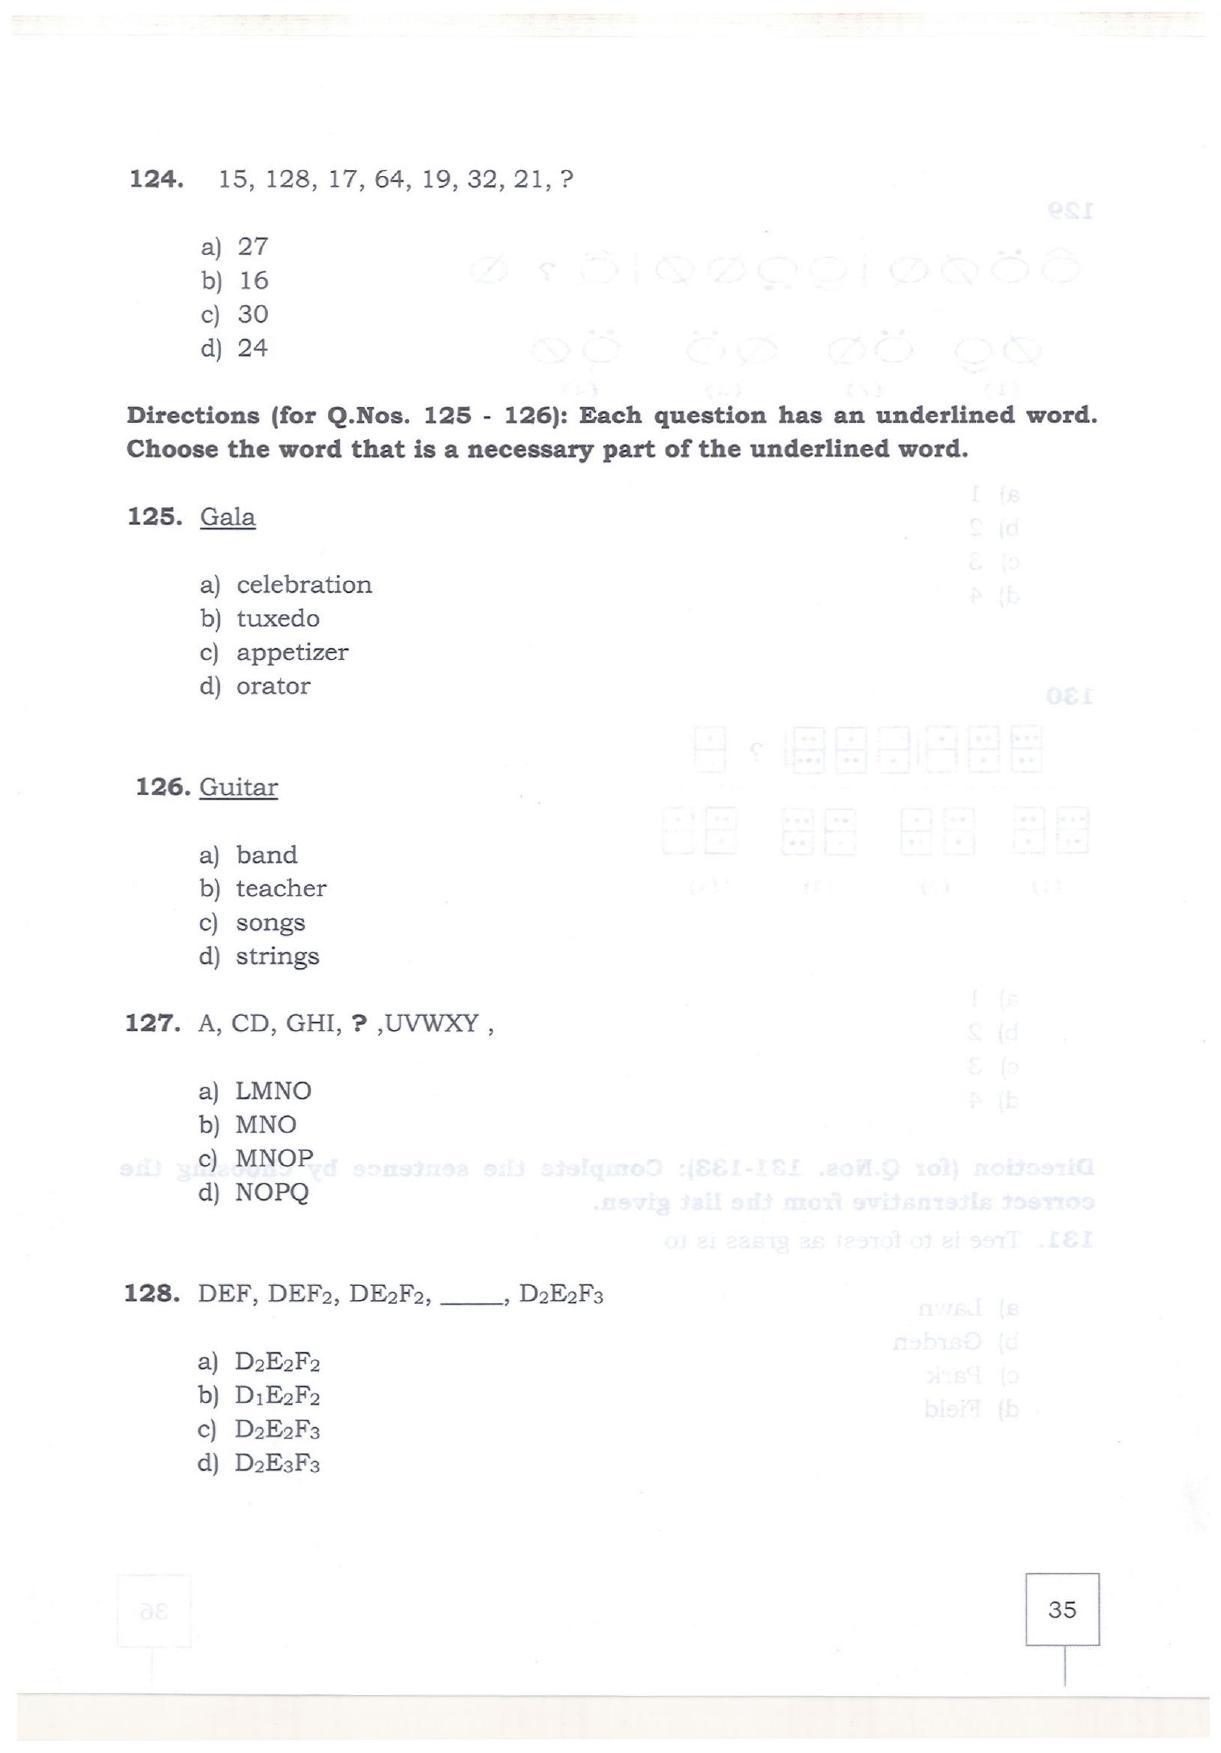 KMAT Question Papers - February 2019 - Page 33